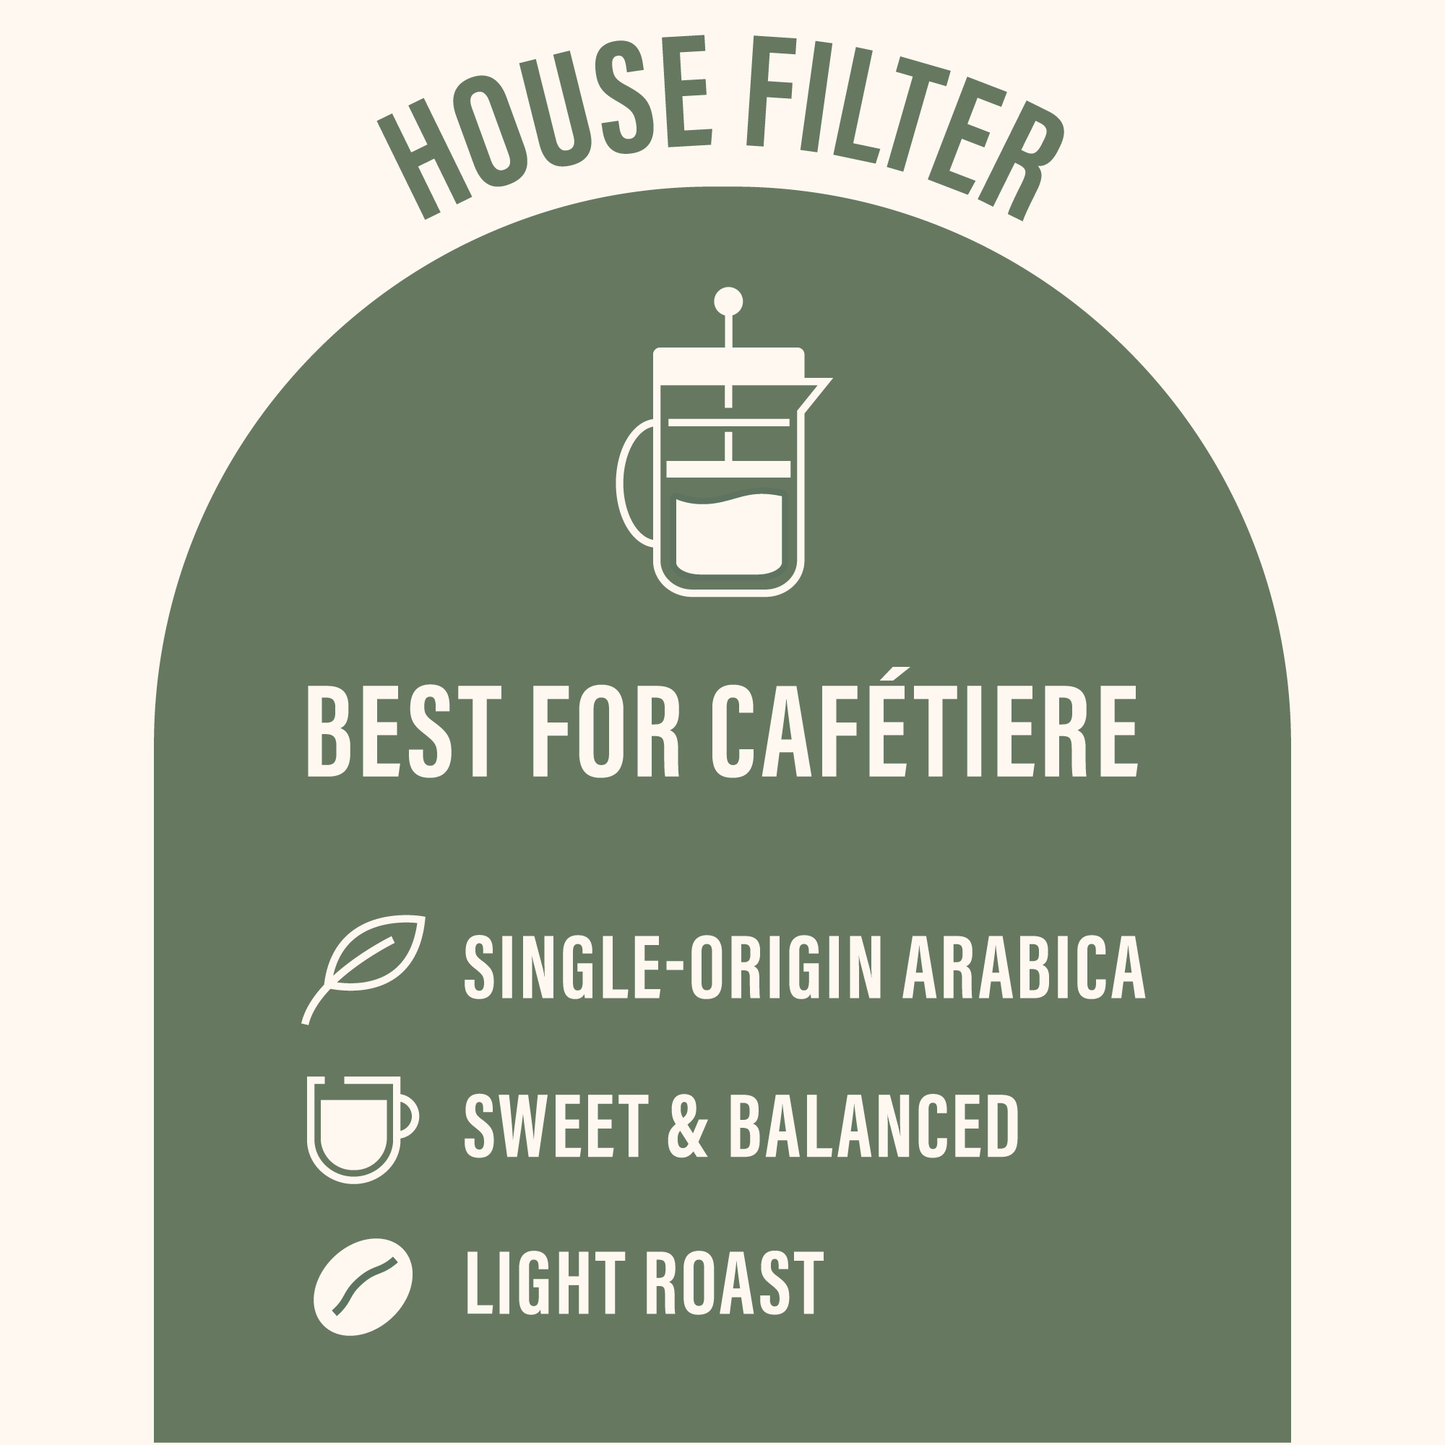 RFA Specialty House Filter Ground Coffee (Multipack of 6 200g pouches)